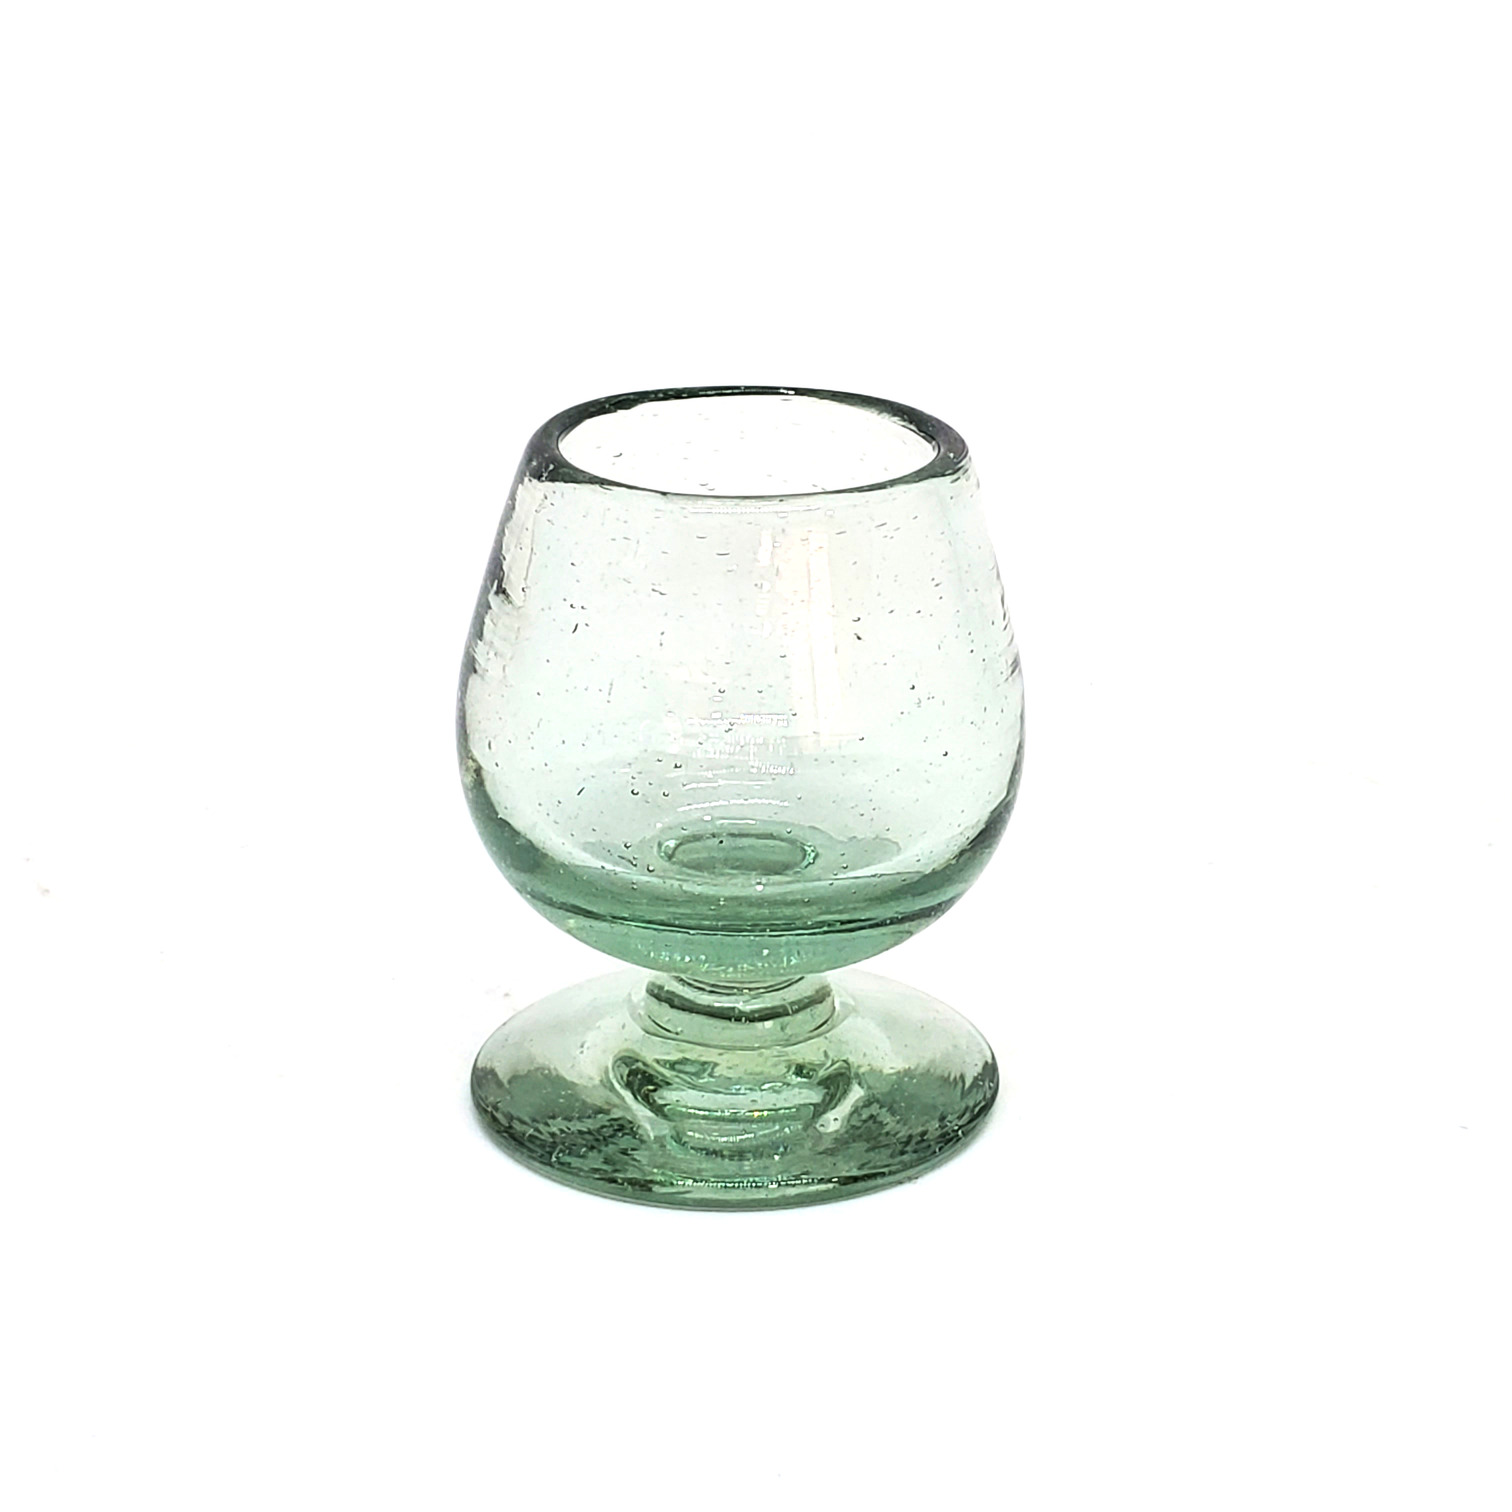 MEXICAN GLASSWARE / Clear Tequila Sippers (set of 6) / Sip your favourite tequila or mezcal with these iconic clear handcrafted sipping glasses. You may also serve lemon juice or other chasers.